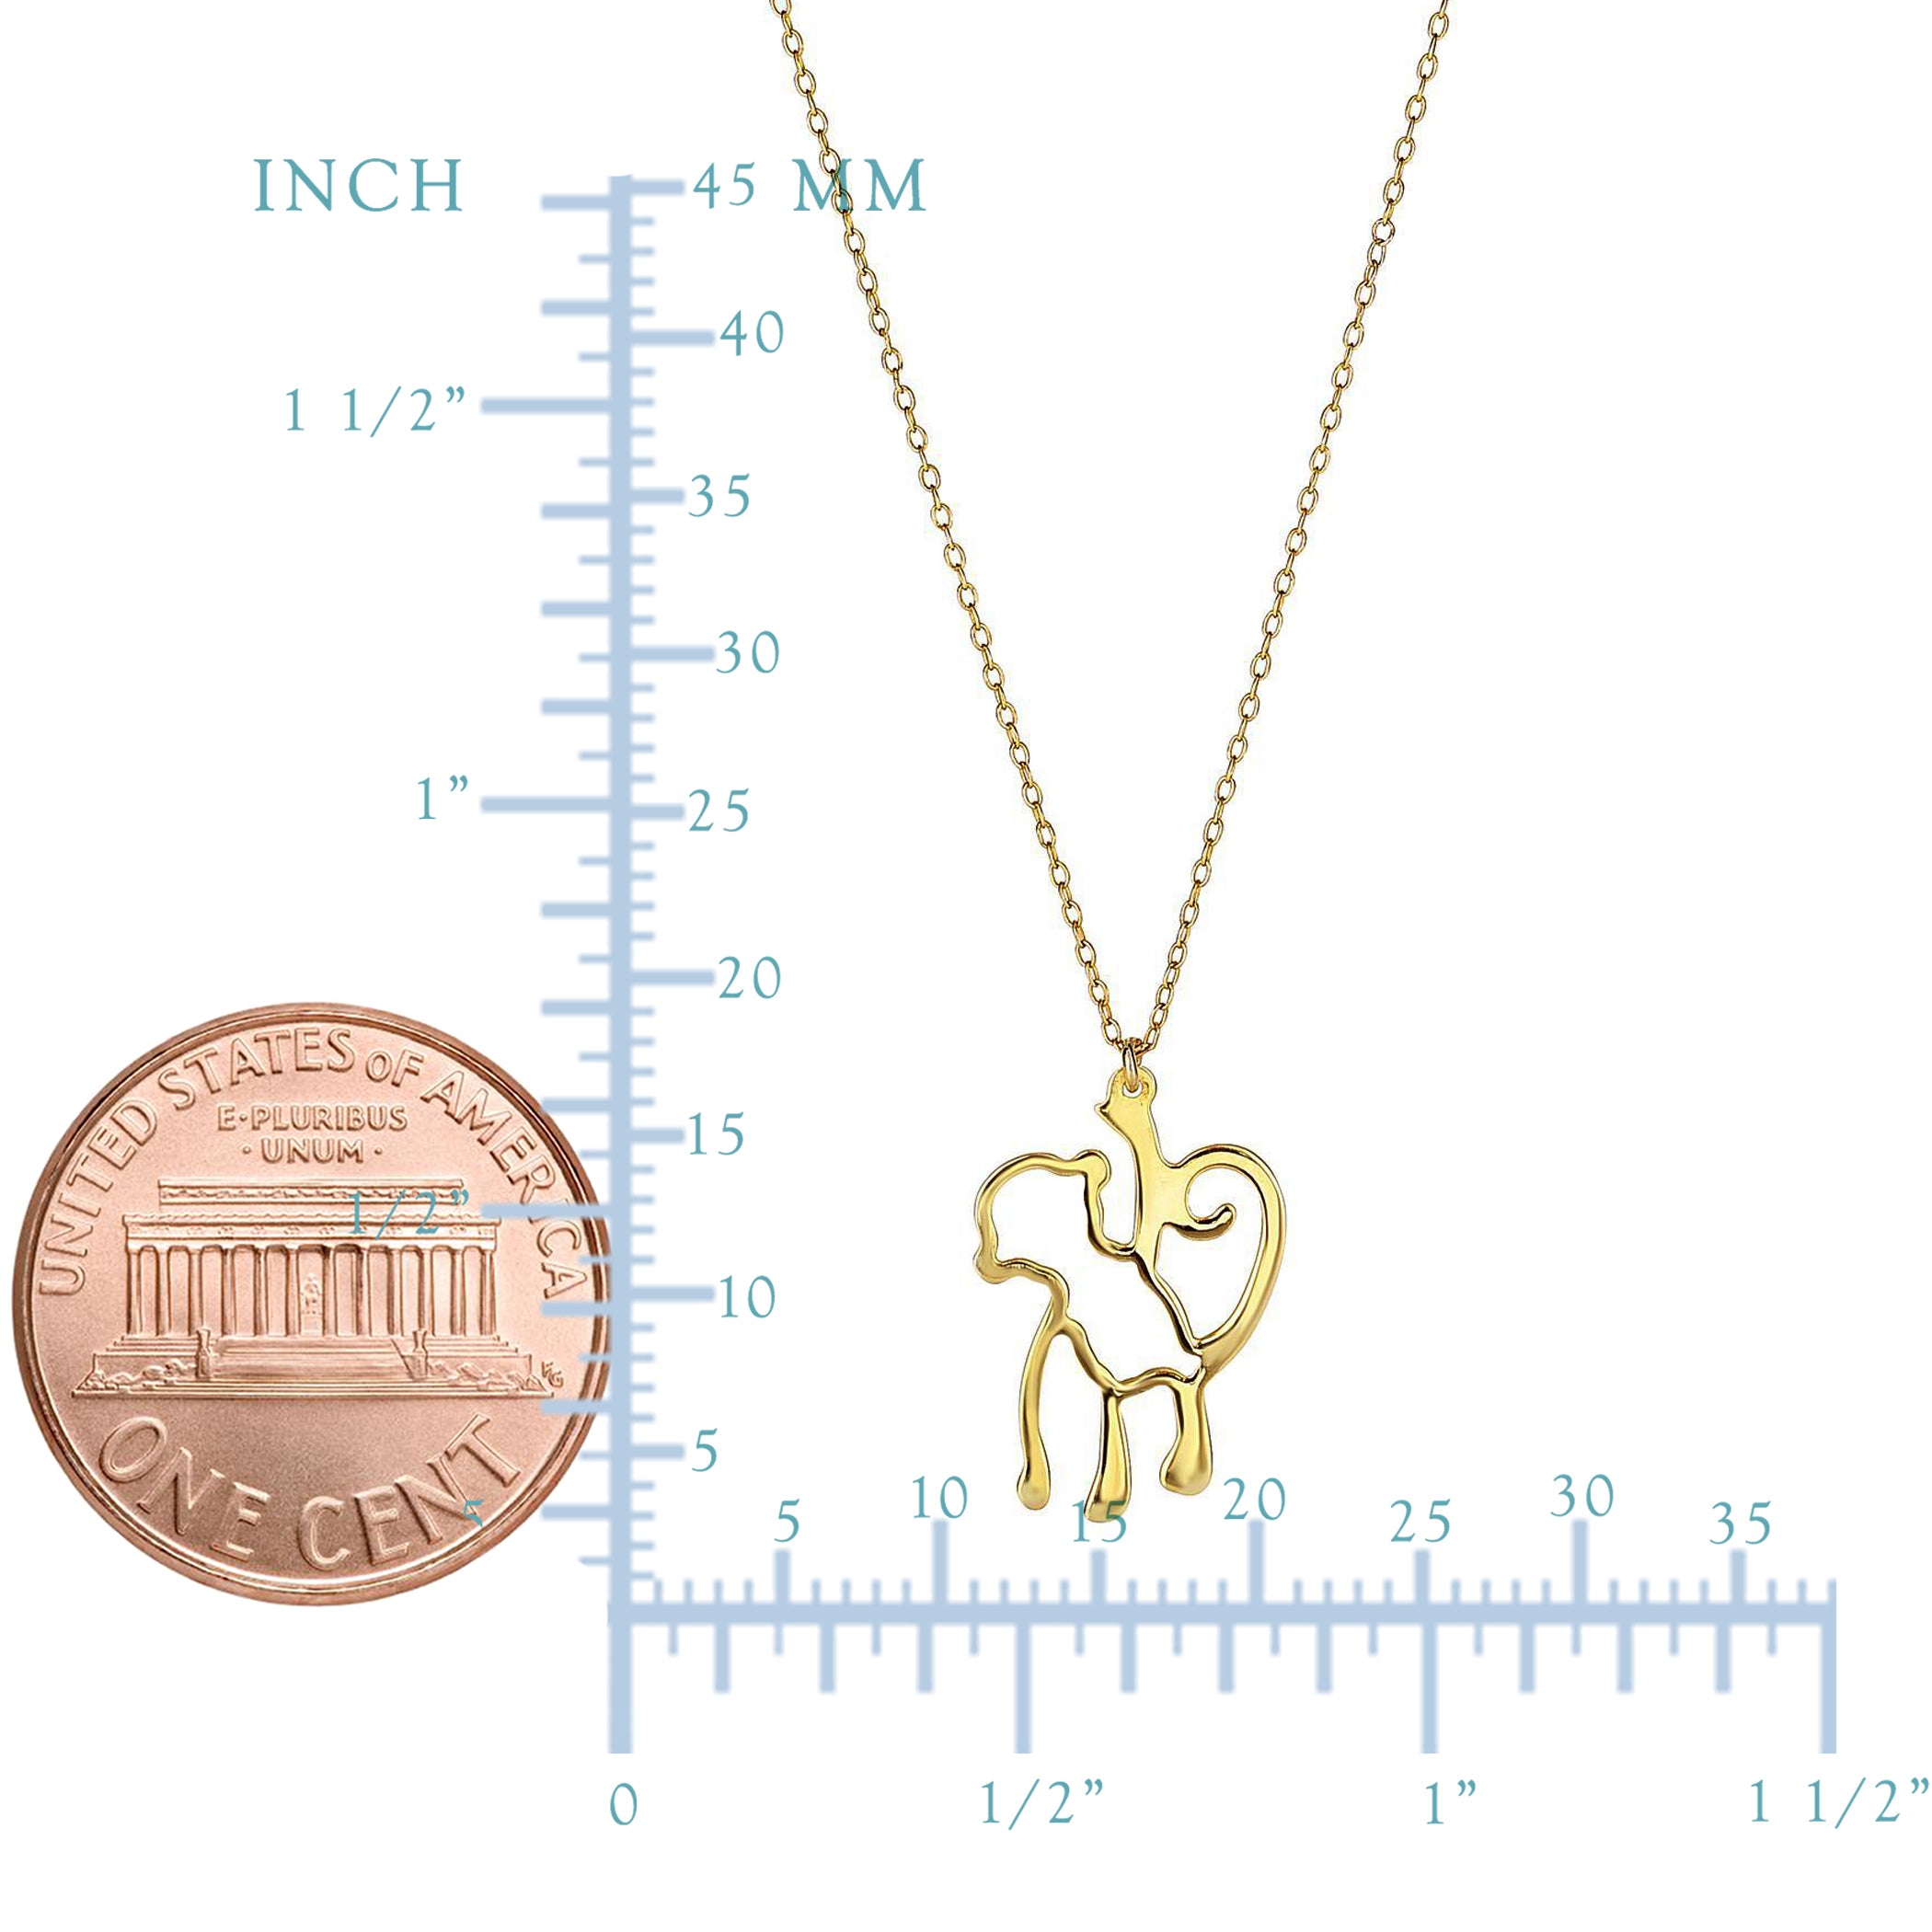 14k Yellow Gold Hanging Monkey Charm Chain Necklace, 18" fine designer jewelry for men and women